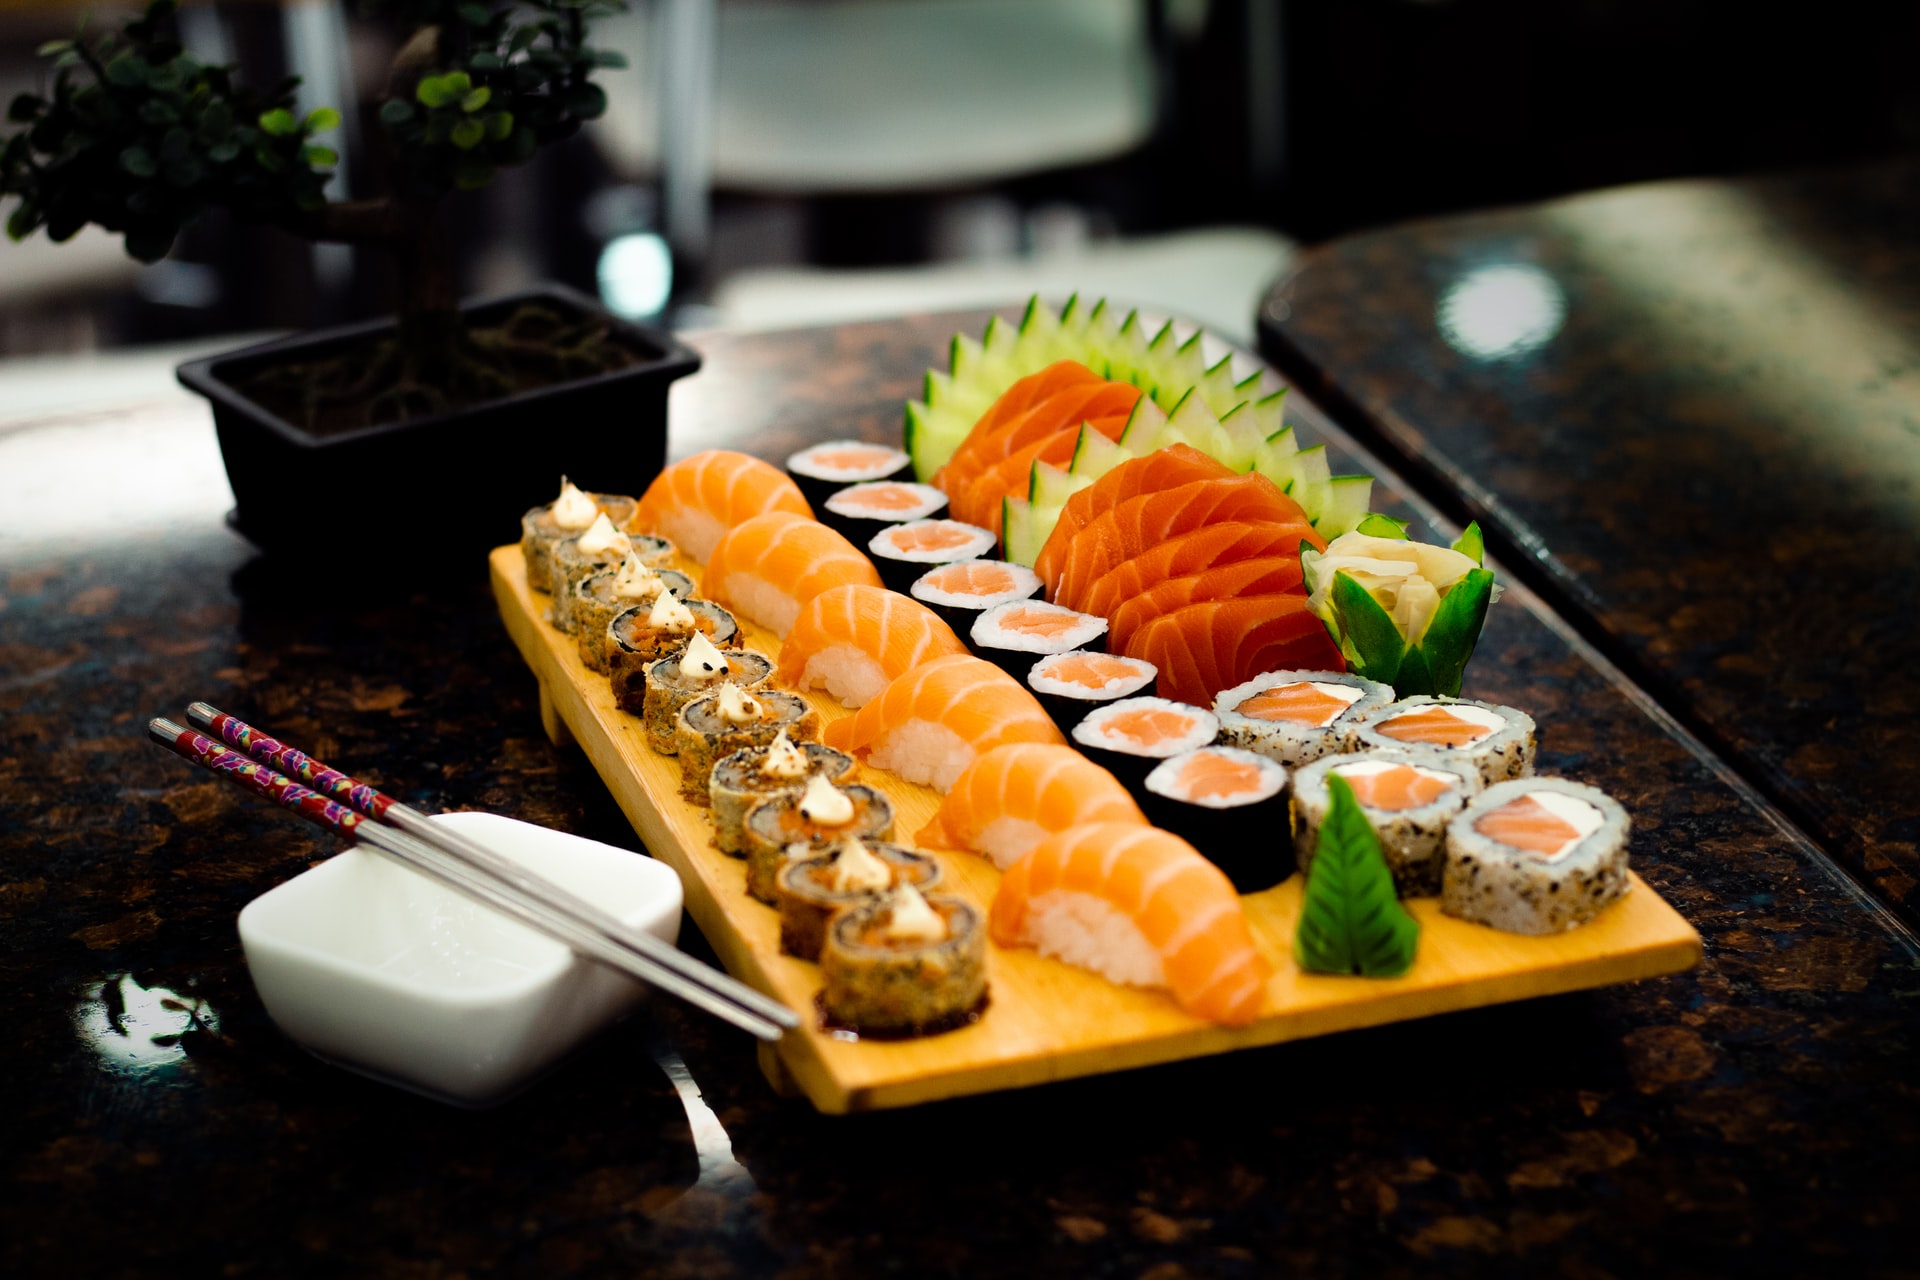 picture of several rows of sushi laid out on a wooden slab, including sushi rolls and other shapes.